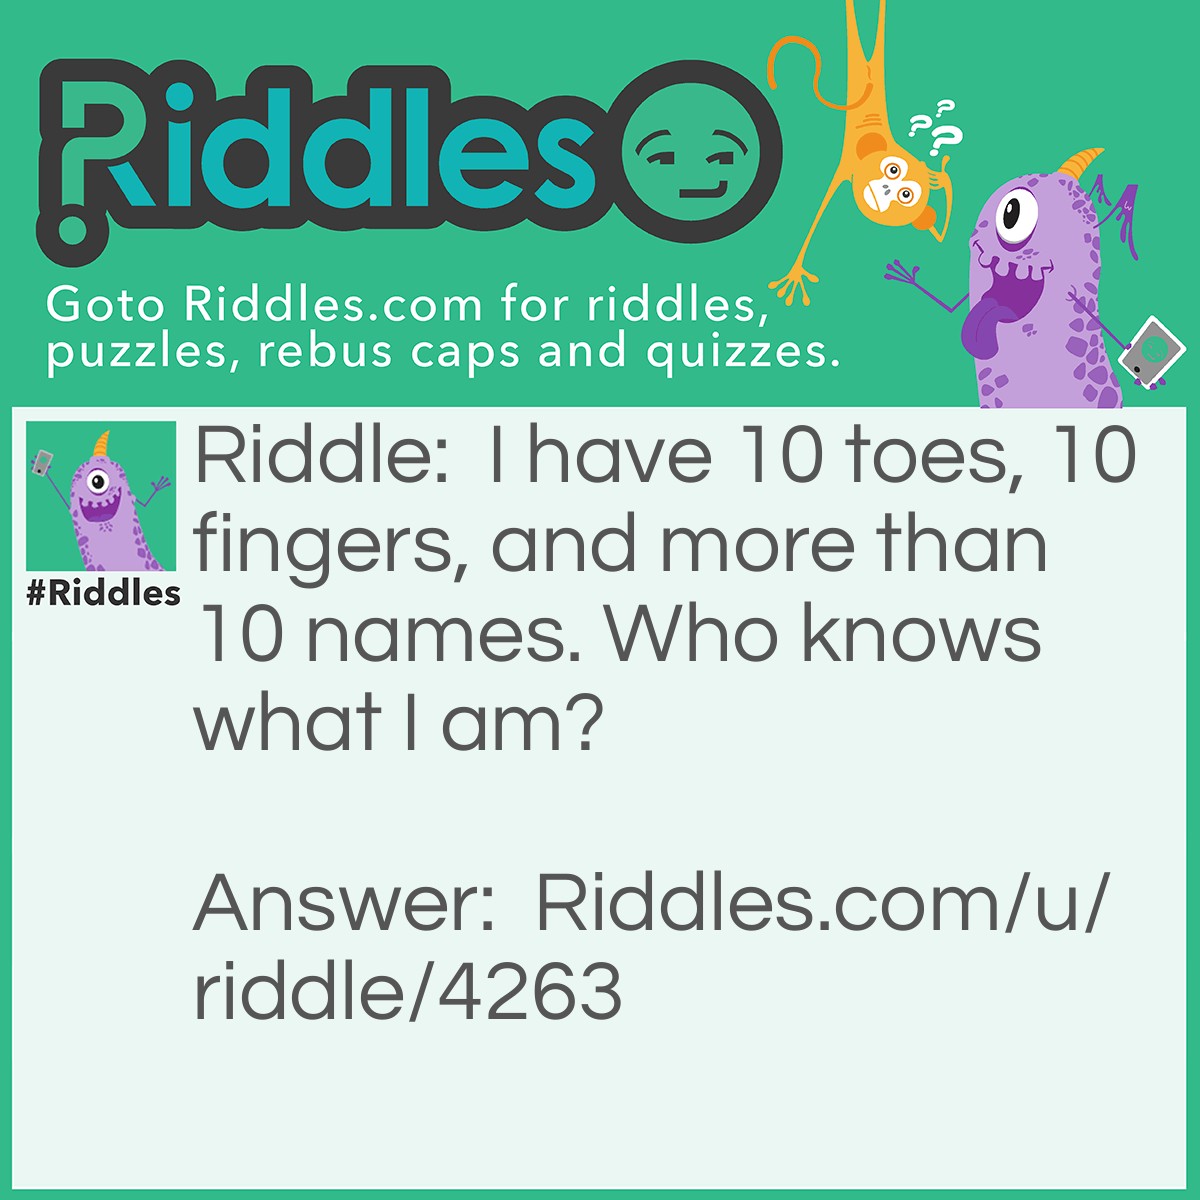 Riddle: I have 10 toes, 10 fingers, and more than 10 names. Who knows what I am? Answer: An ape, monkey, or gorilla.